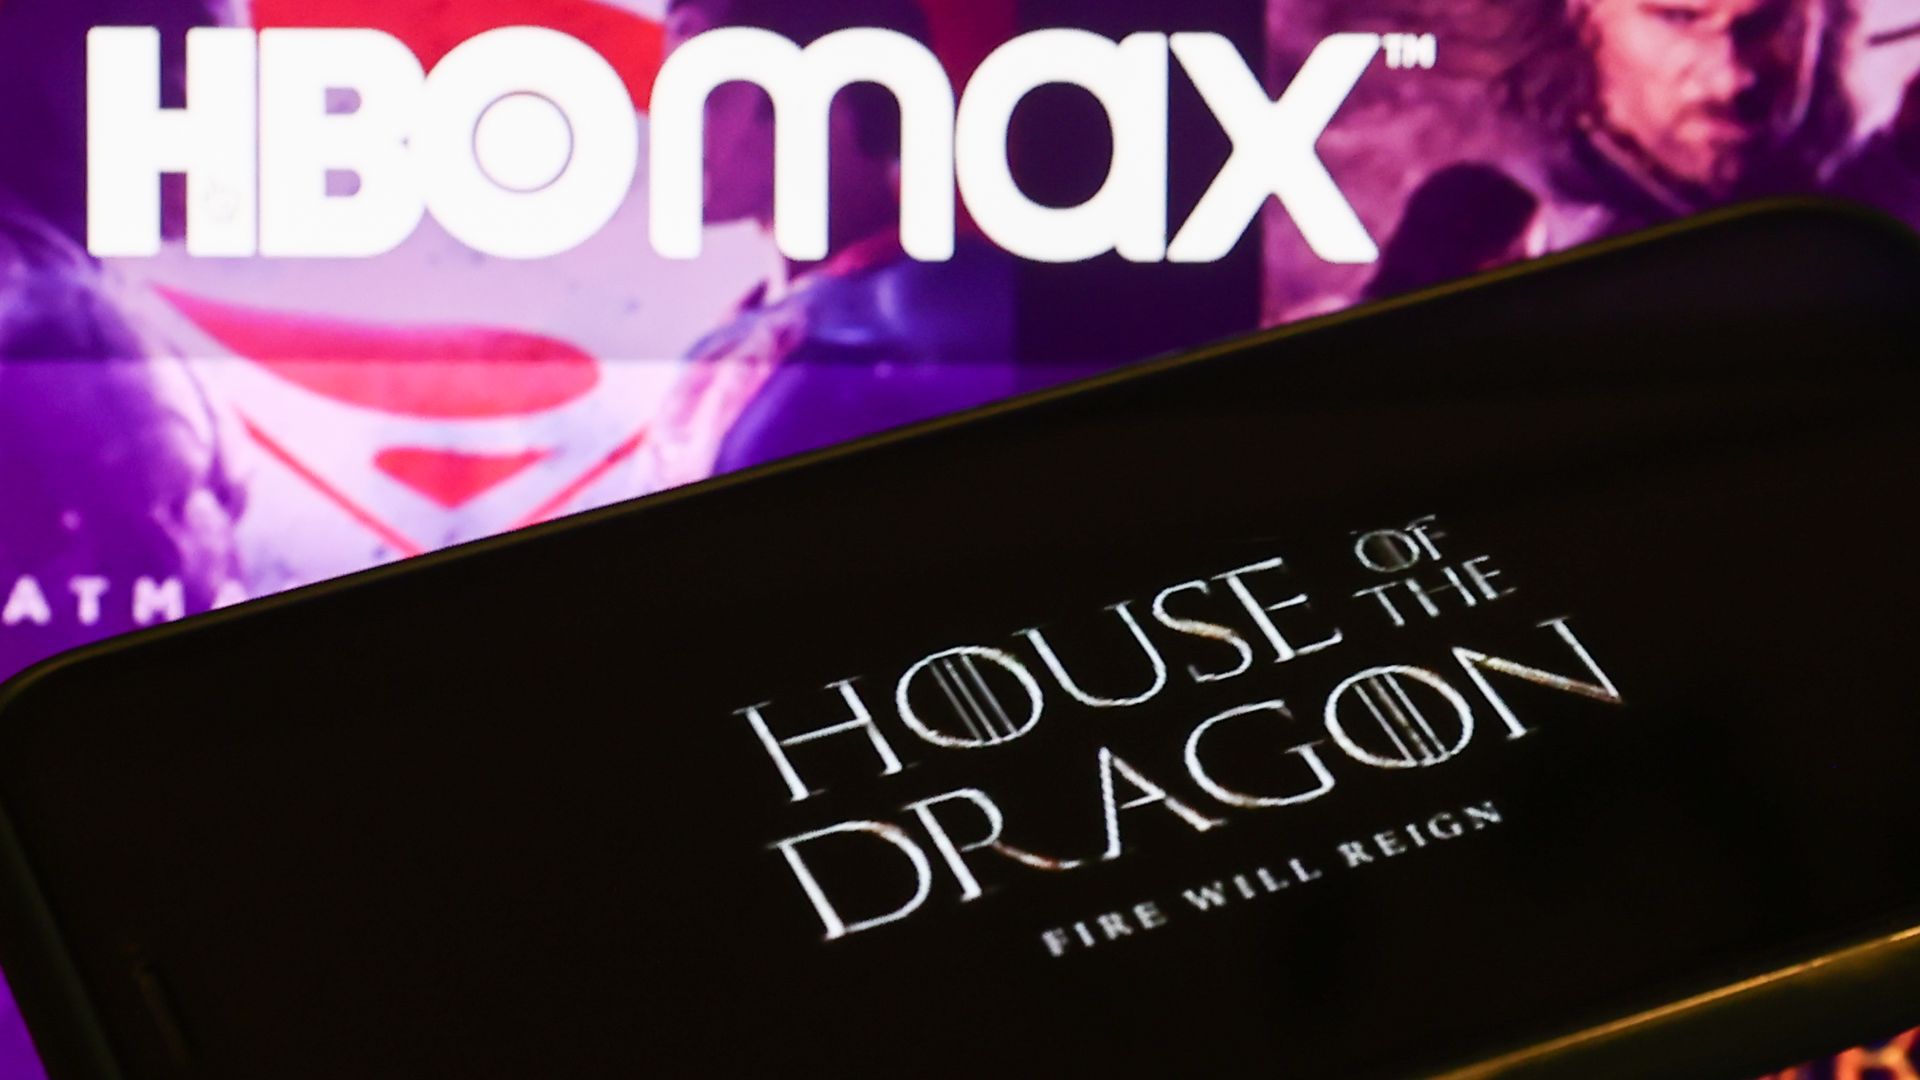 House Of The Dragon 2 Release Date Window Officially Announced By HBO